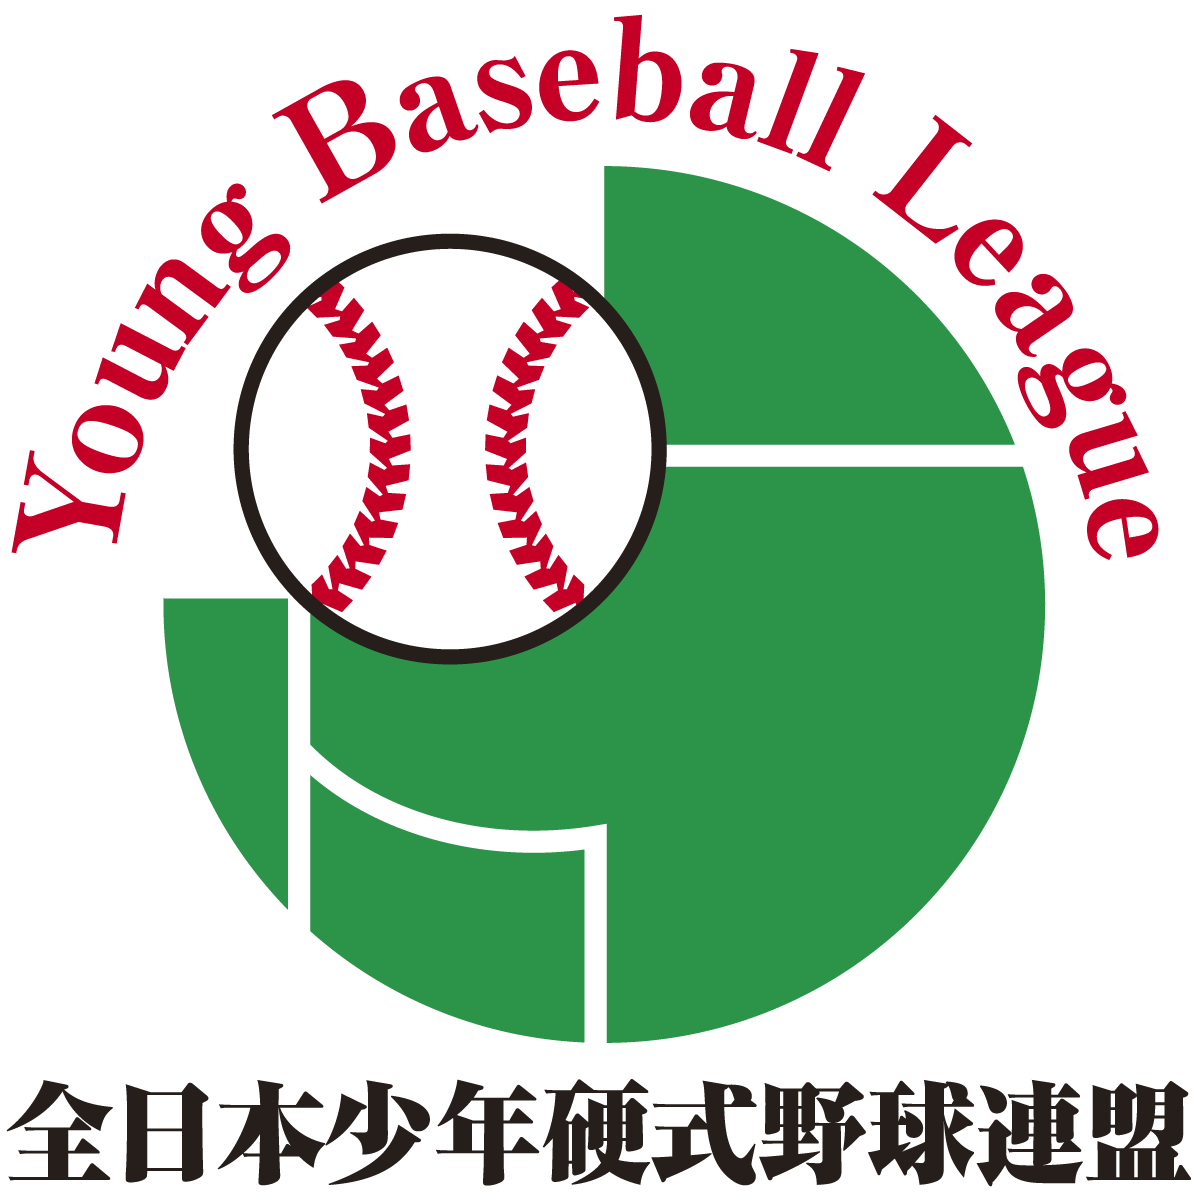 Young League